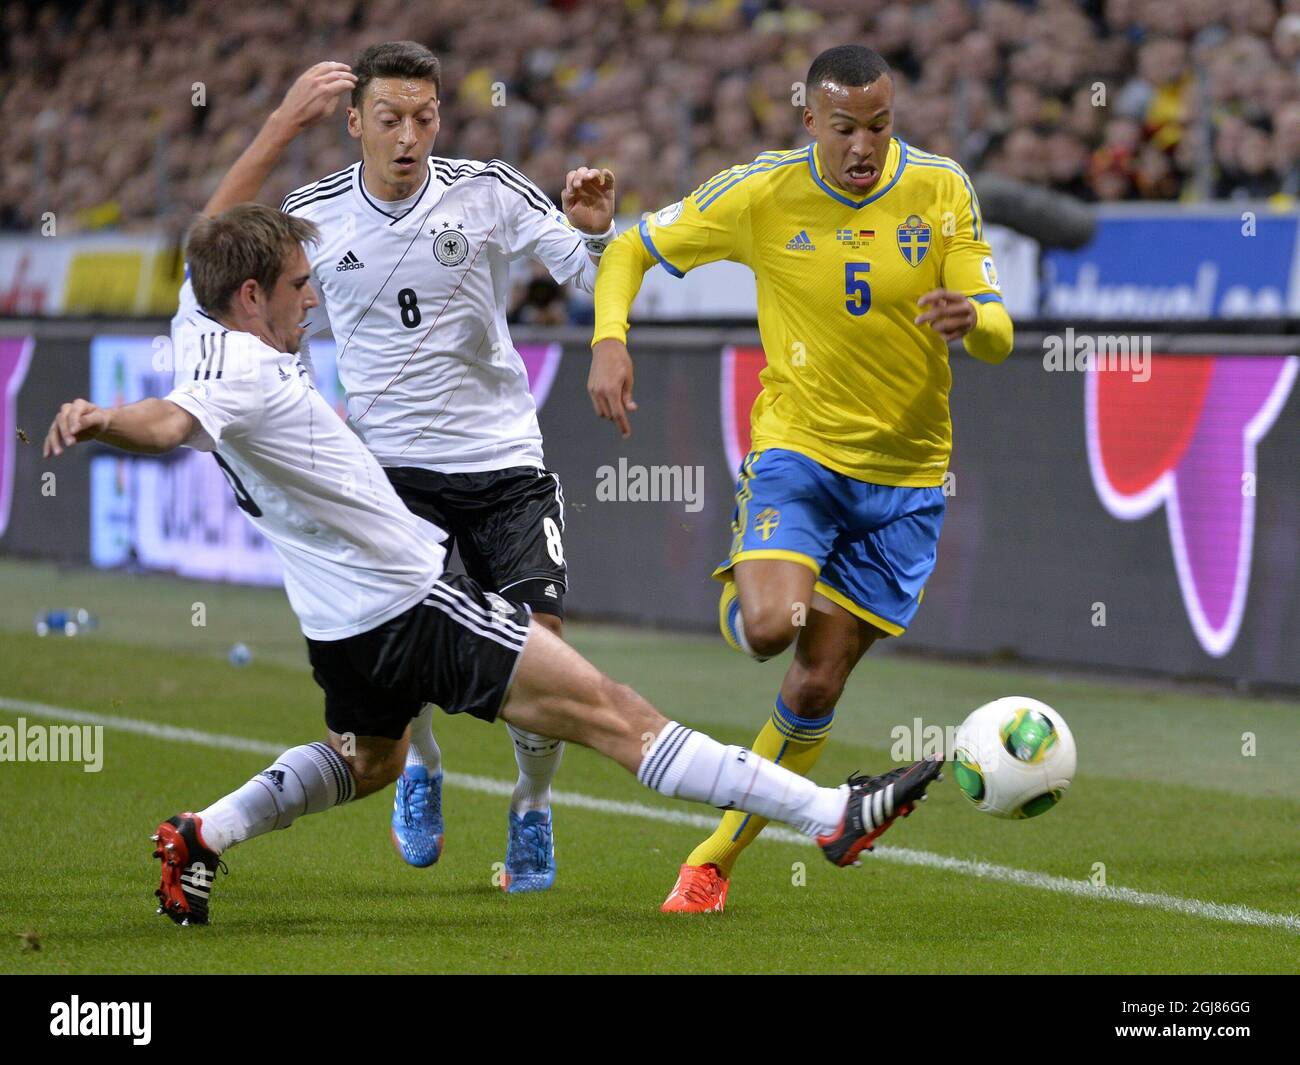 Germany's Philipp Lahm (L) and Mesut Oezil (C) vie with Sweden's Martin Olsson during the 2014 World Cup group C qualifying soccer match between Sweden and Germany at Friends Arena in Stockholm, Sweden, on Oct. 15, 2013. Photo: Anders Wiklund / TT / code 10040  Stock Photo